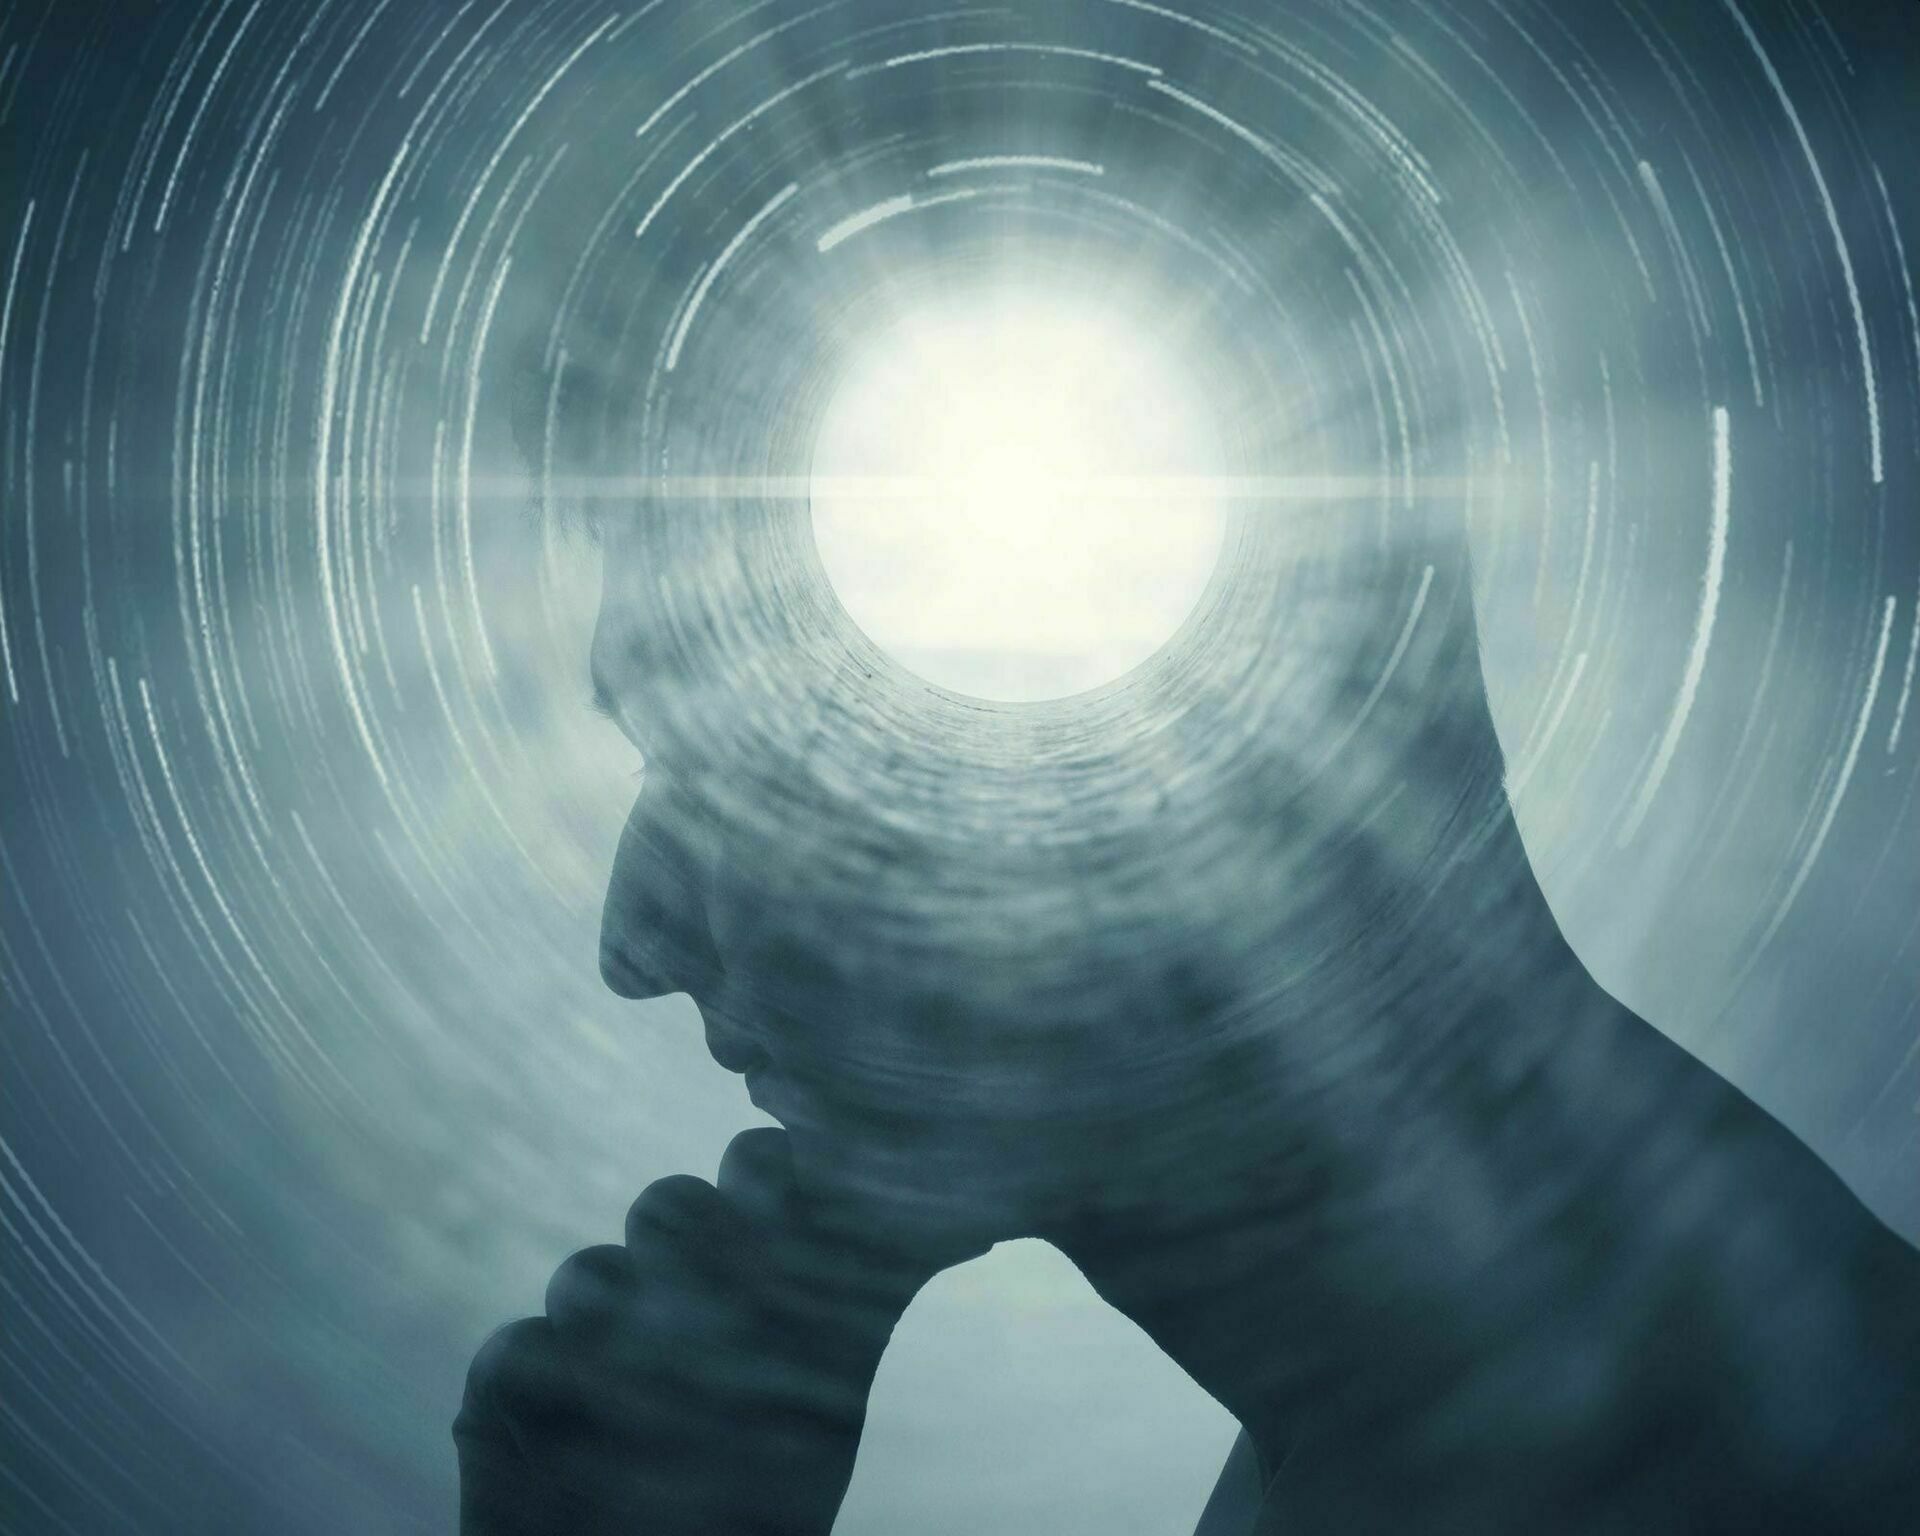 Spirituality is embedded in the human brain, neuroscientists say